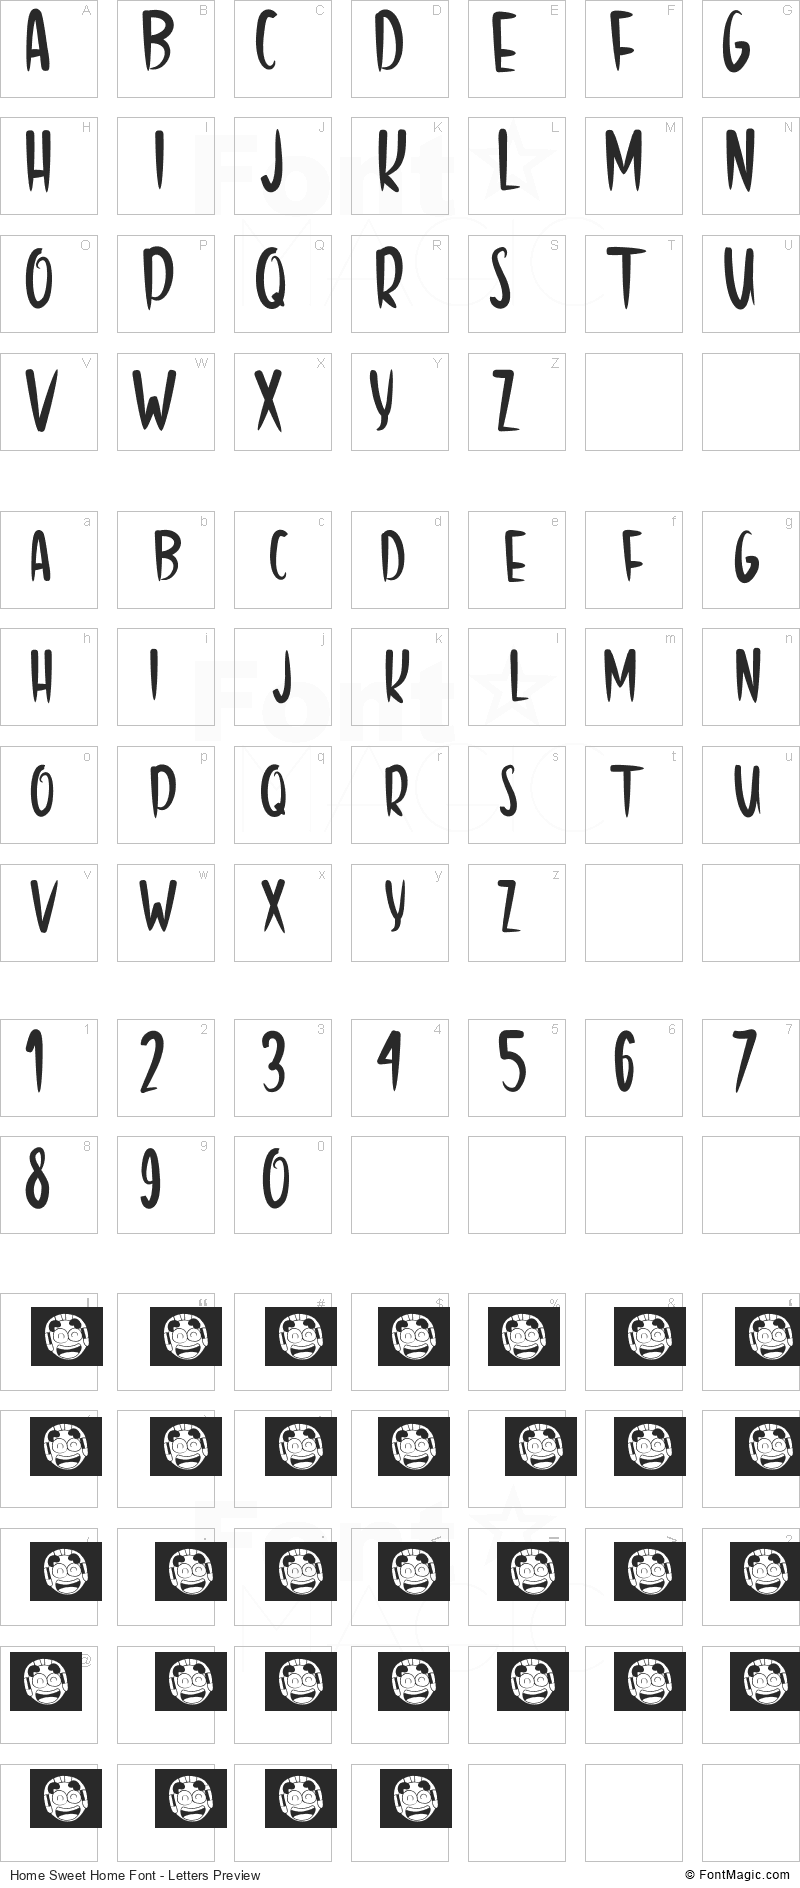 Home Sweet Home Font - All Latters Preview Chart